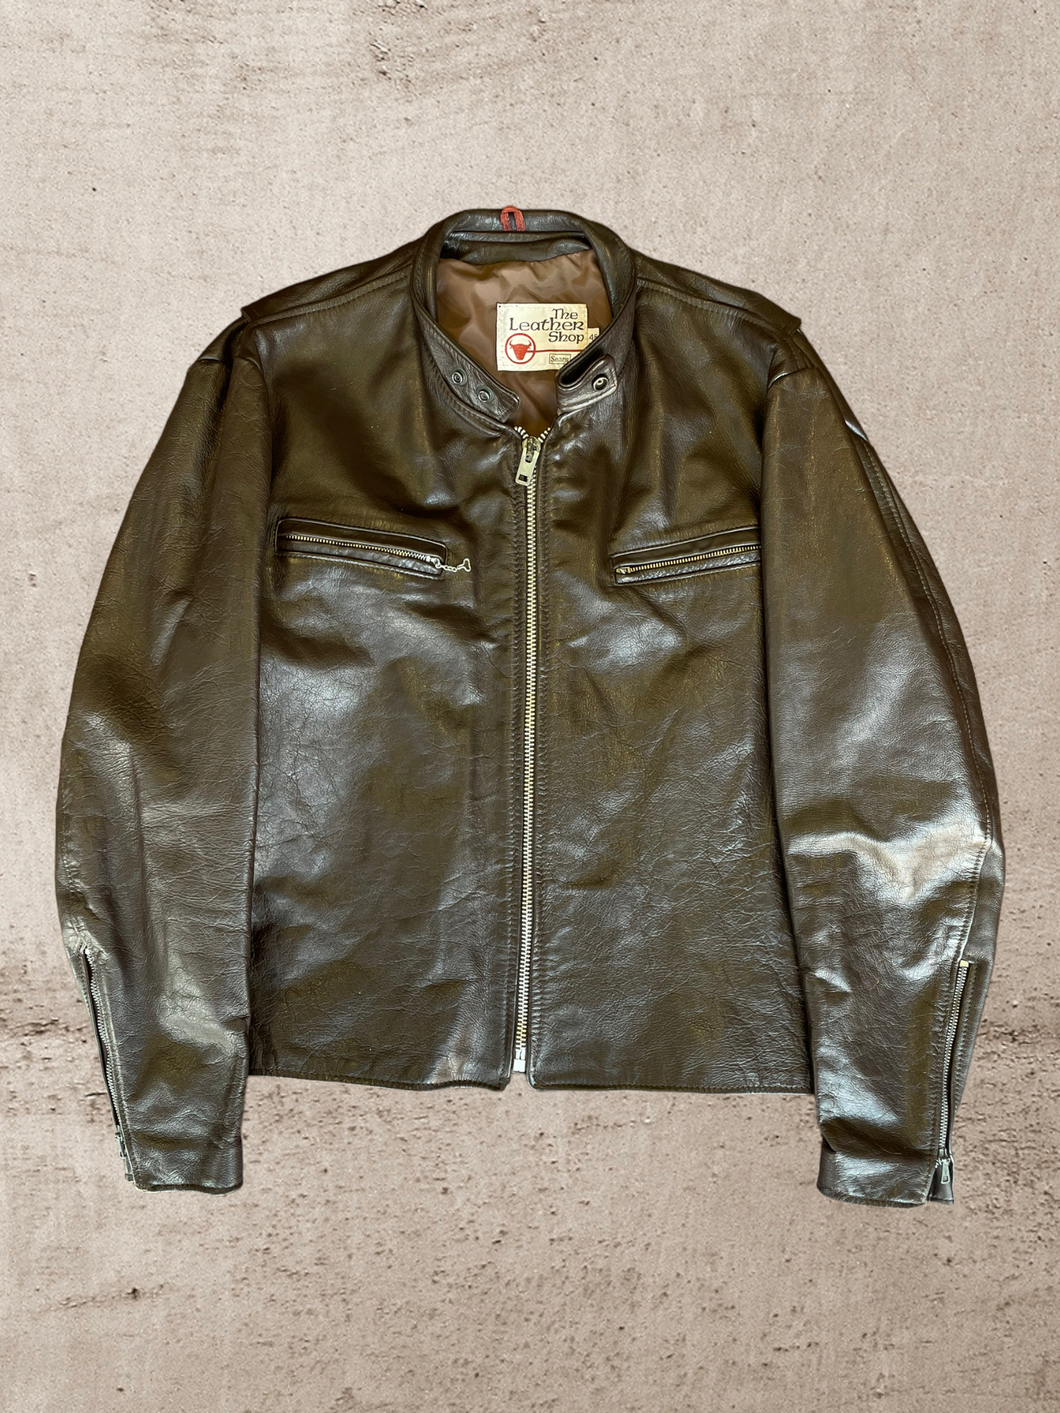 70s Brown Leather Sears Jacket - XL